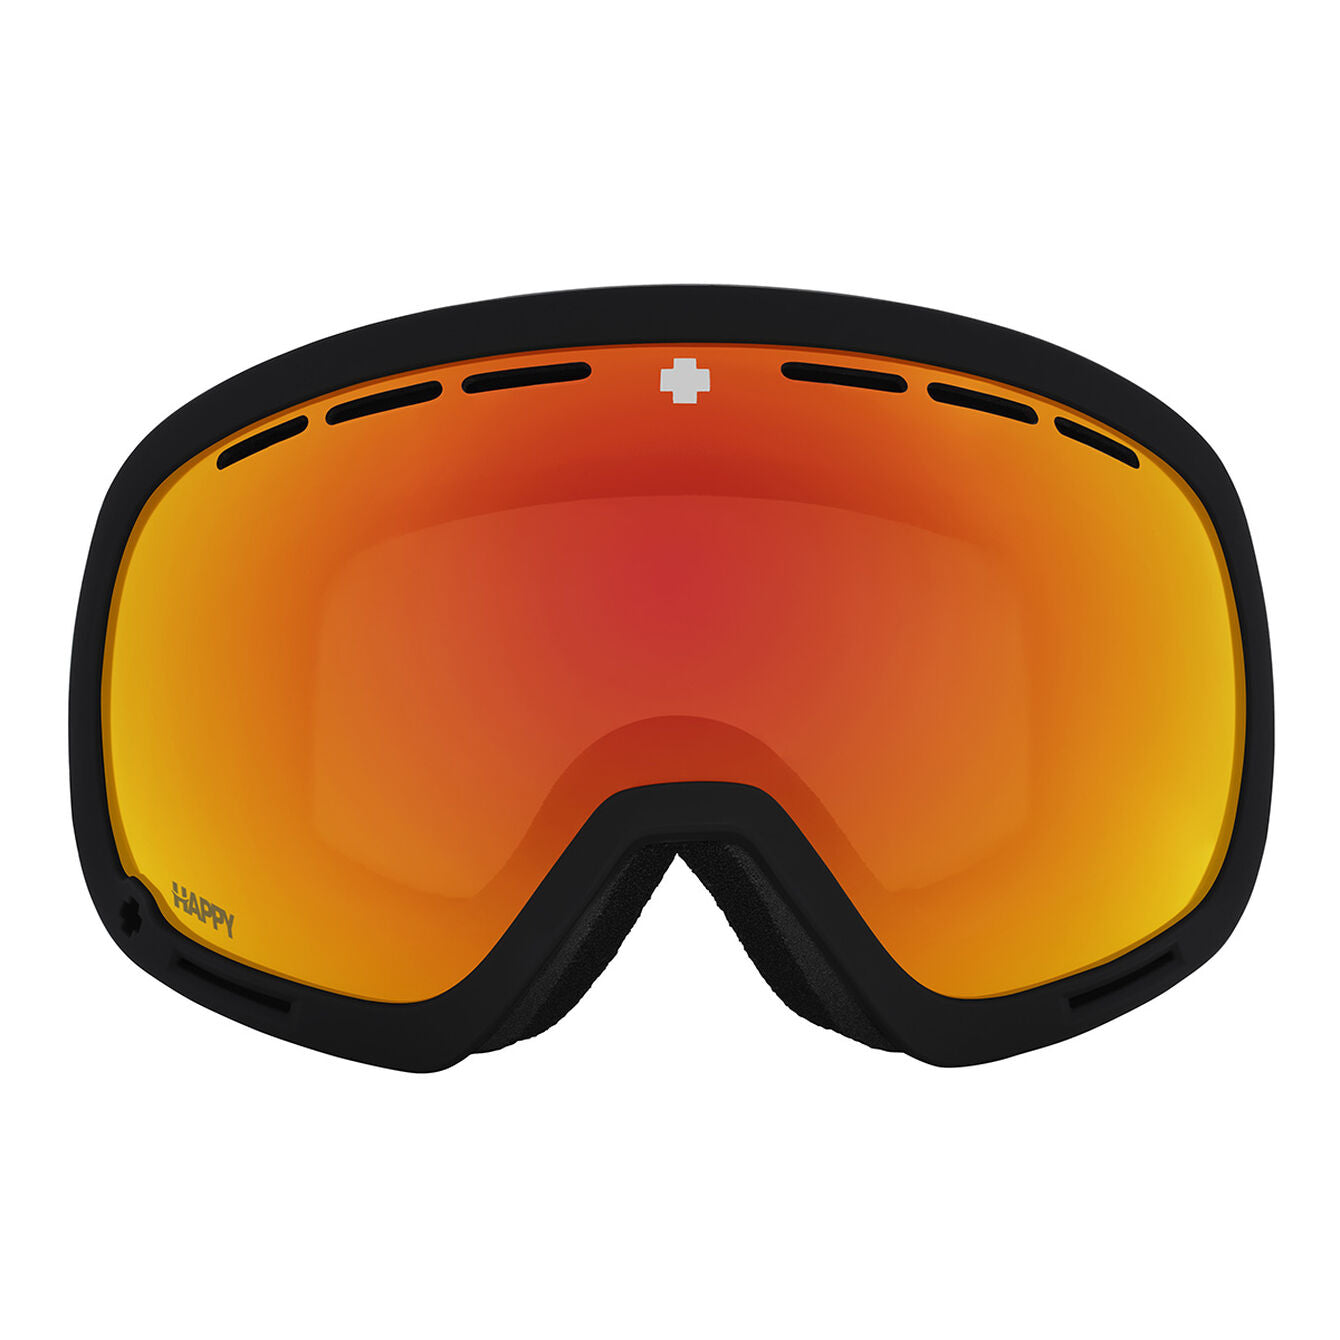 Spy Optic Marshall Happy Lens Polycarbonate Snow Goggle MSRP $130 ...